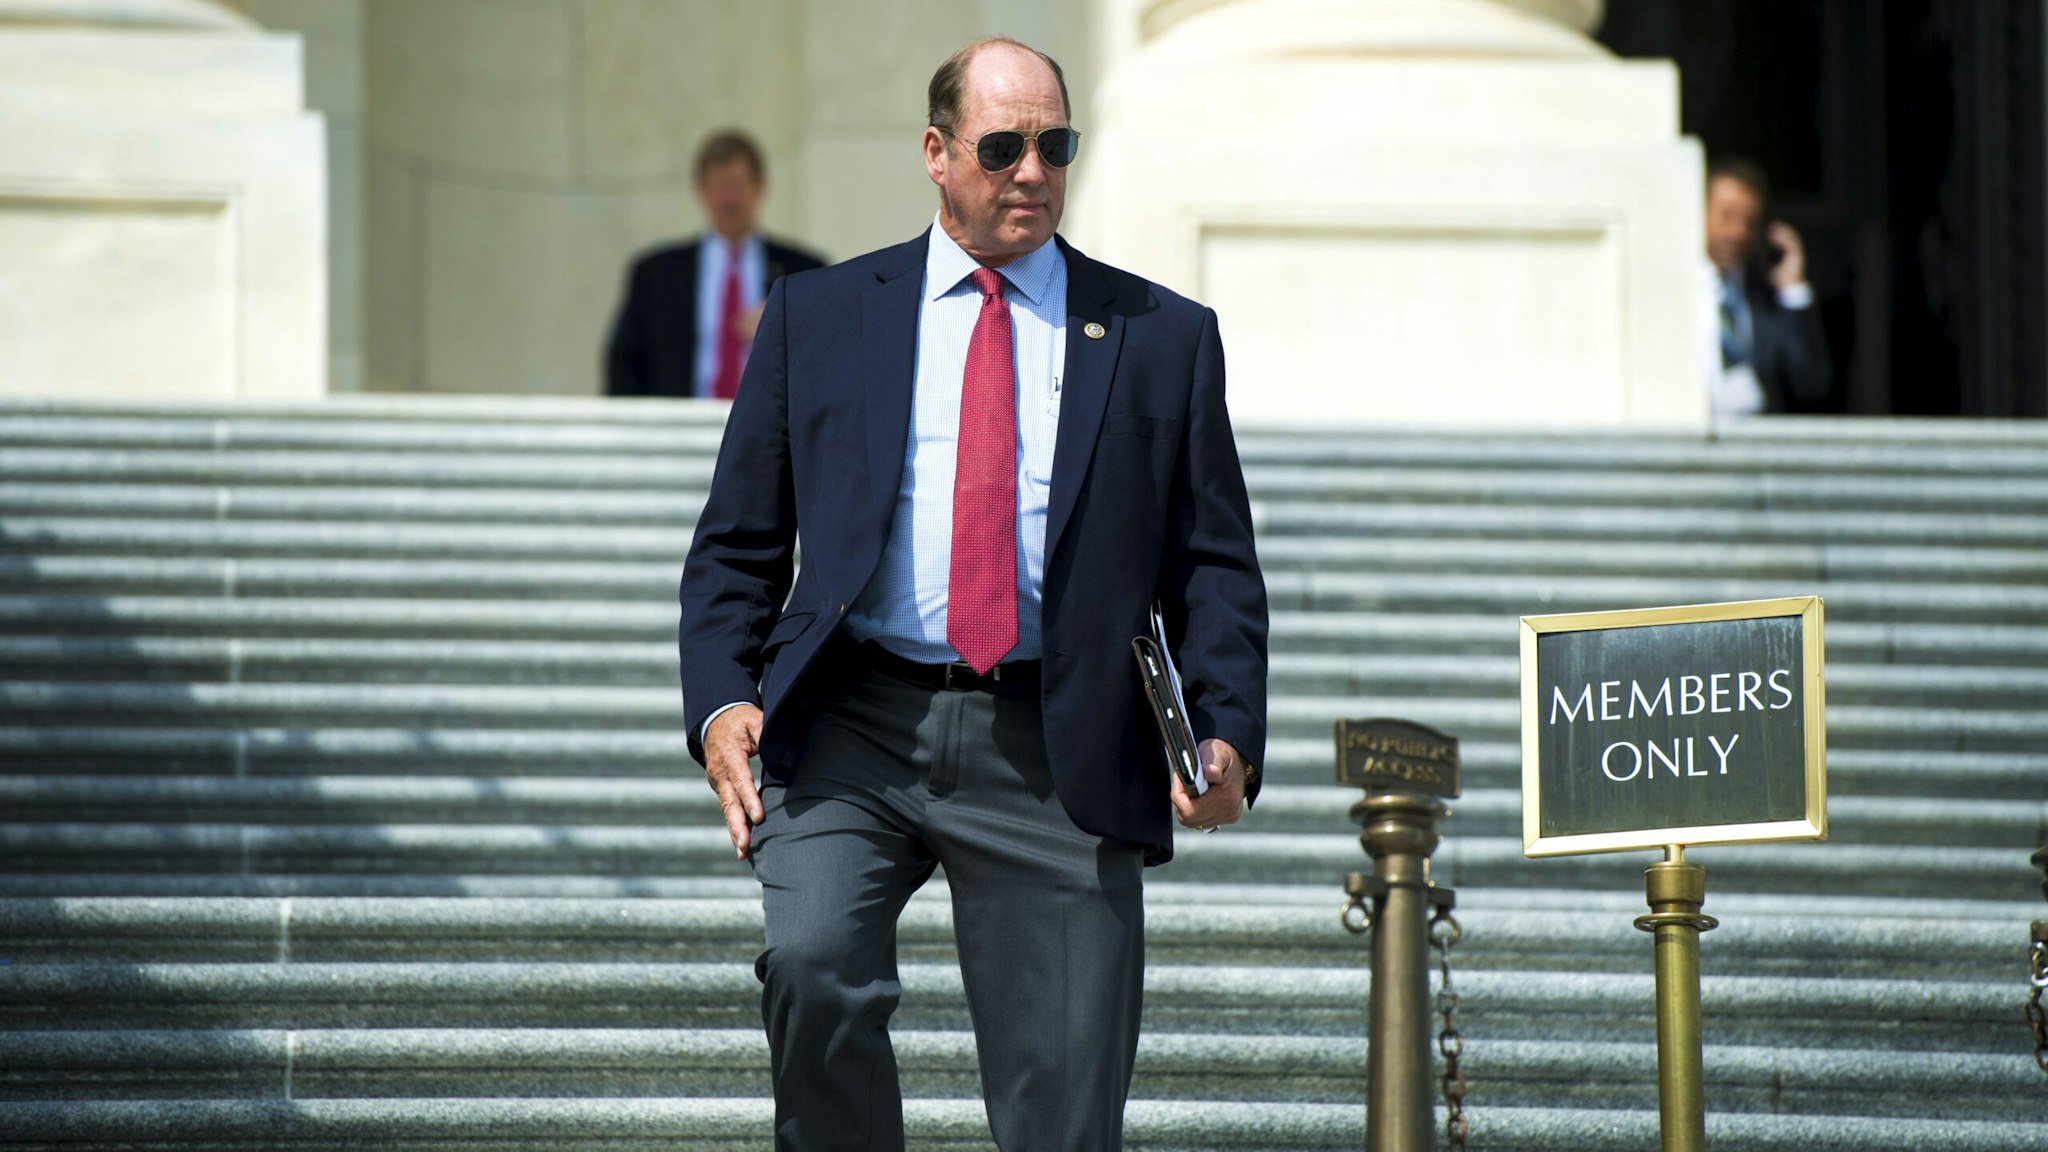 UNITED STATES - SEPTEMBER 7: Rep. Ted Yoho, R-Fla., walks down the House steps after the last vote of the week on Friday, Sept. 7, 2018.